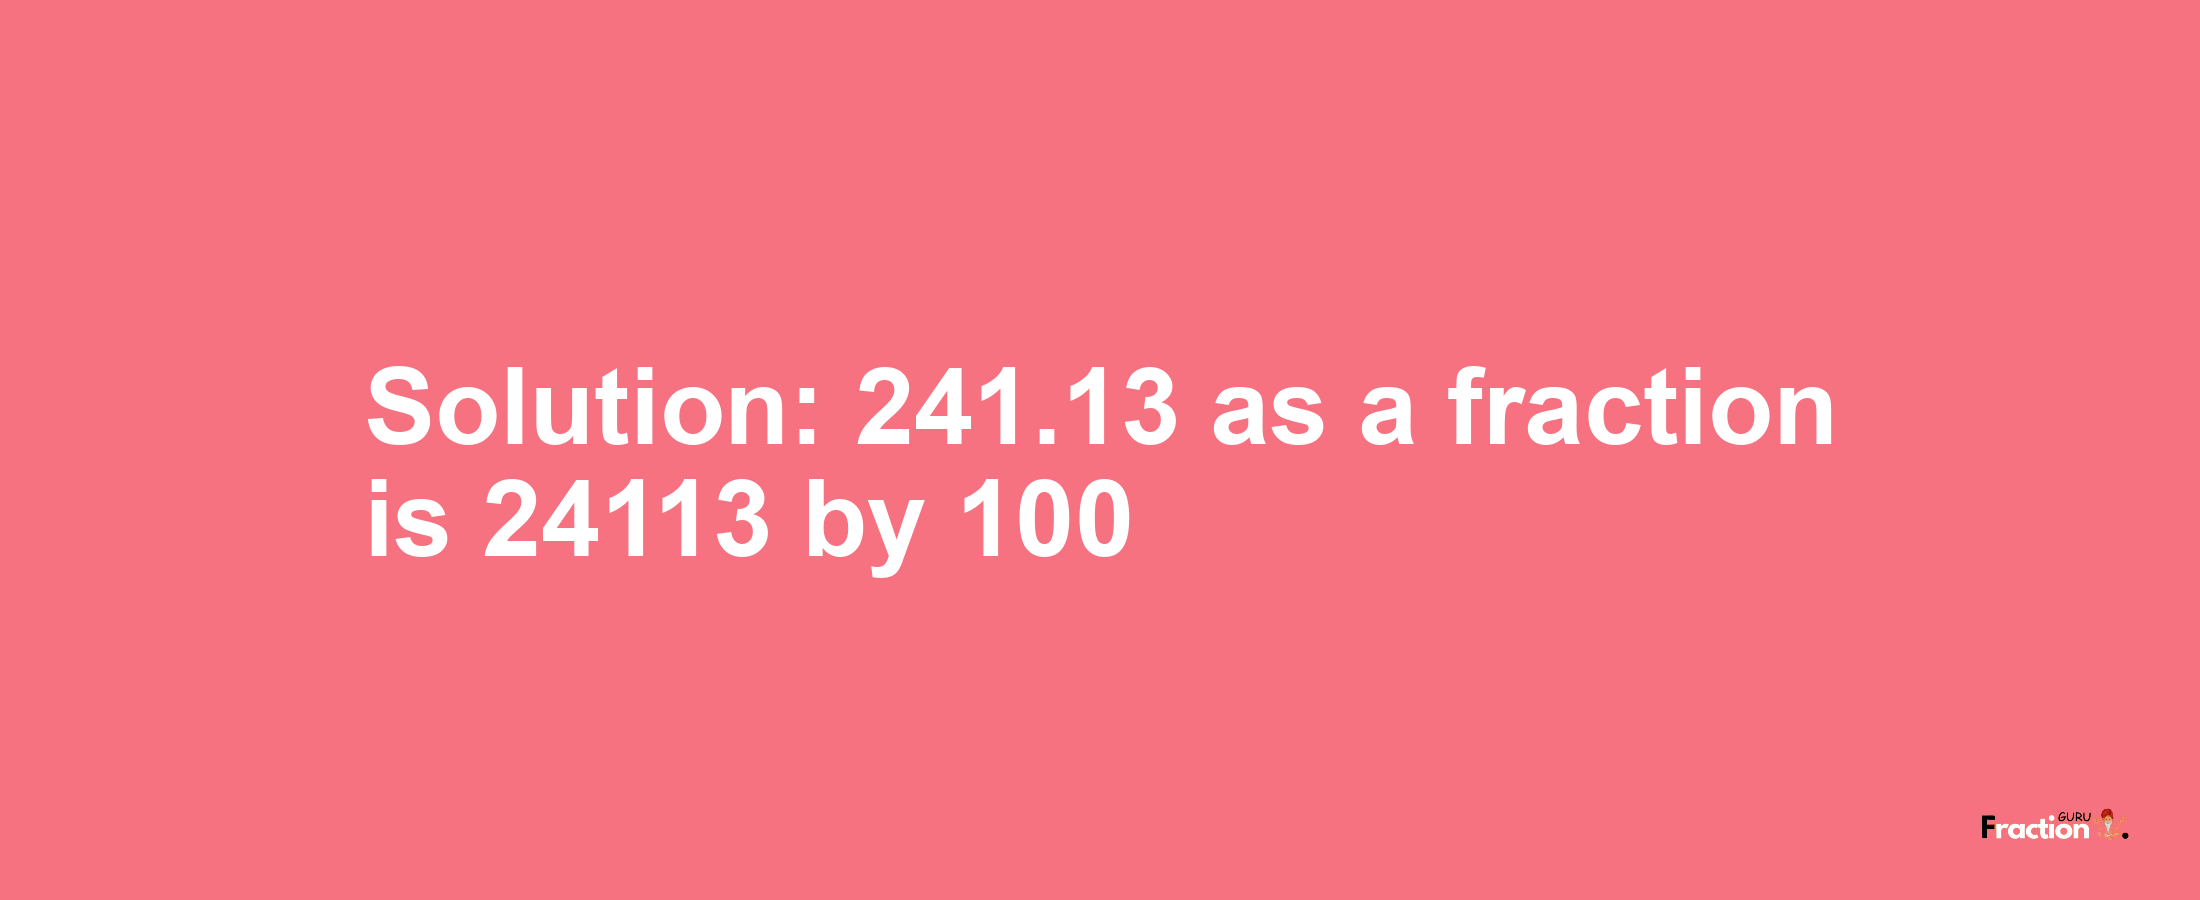 Solution:241.13 as a fraction is 24113/100